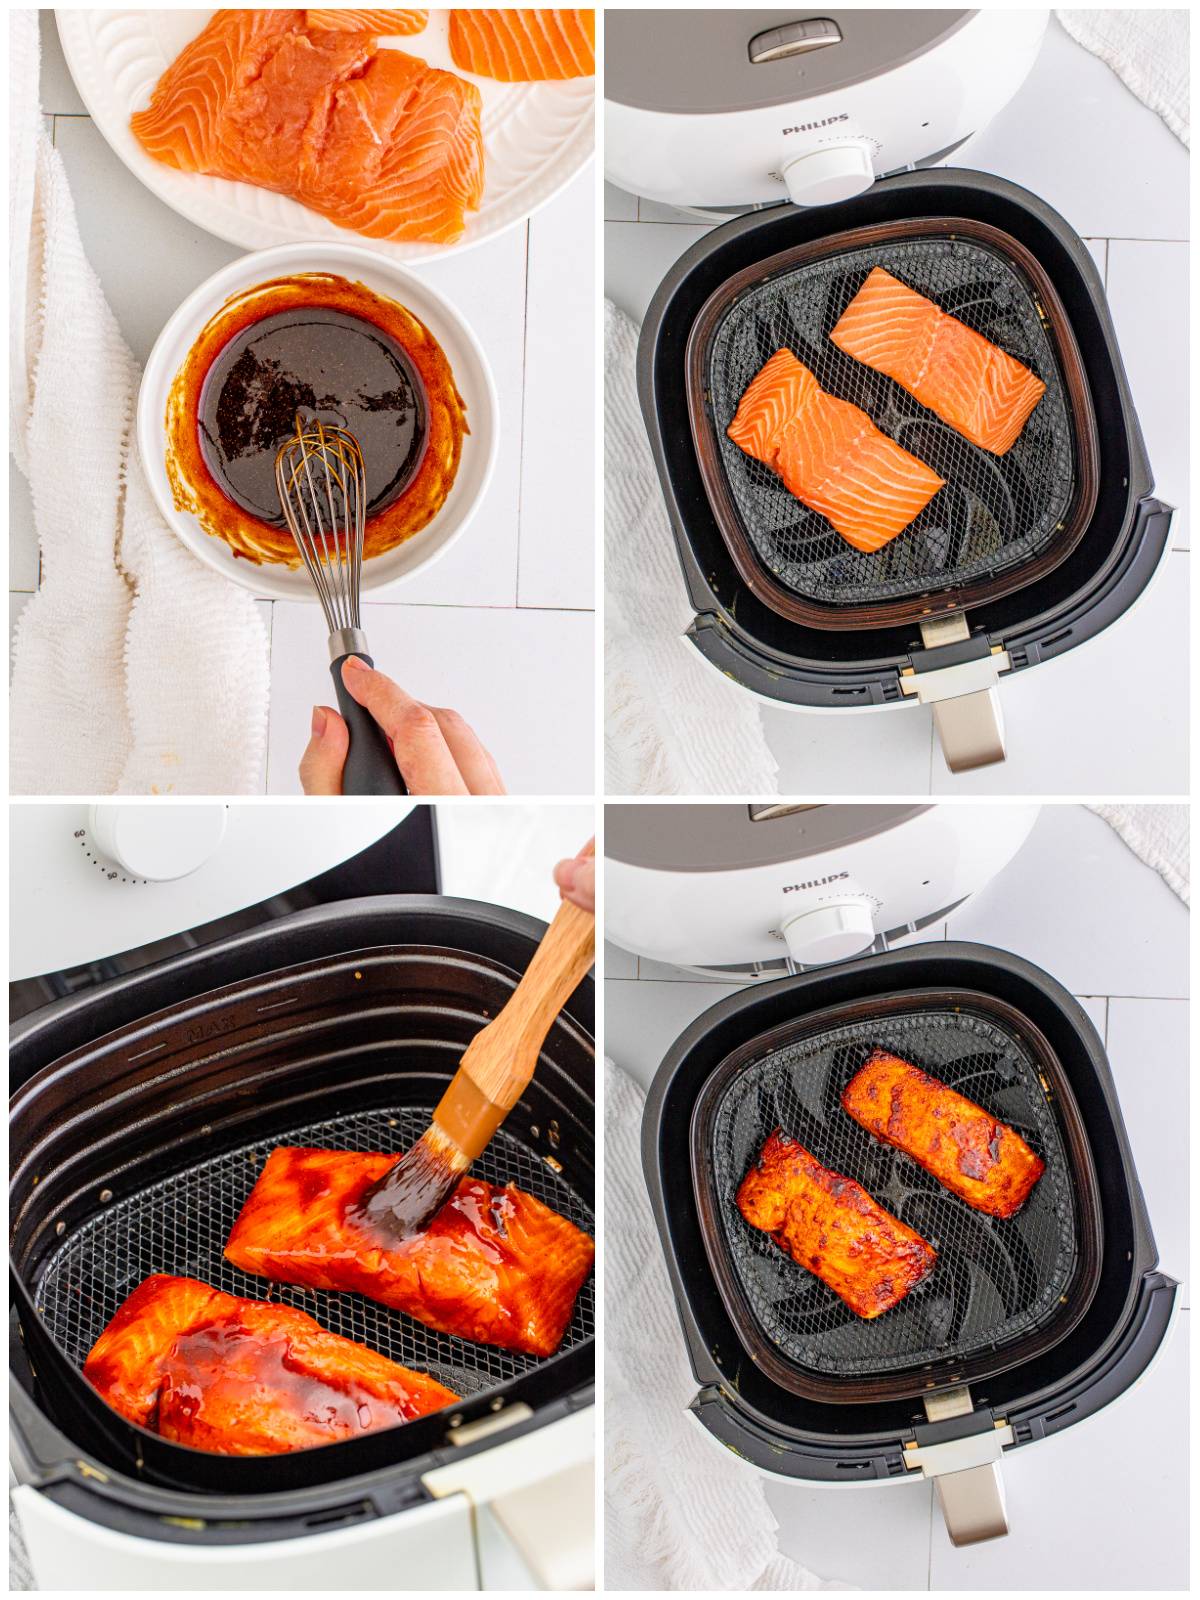 Step by step photos on how to make an Air Fryer Salmon Recipe